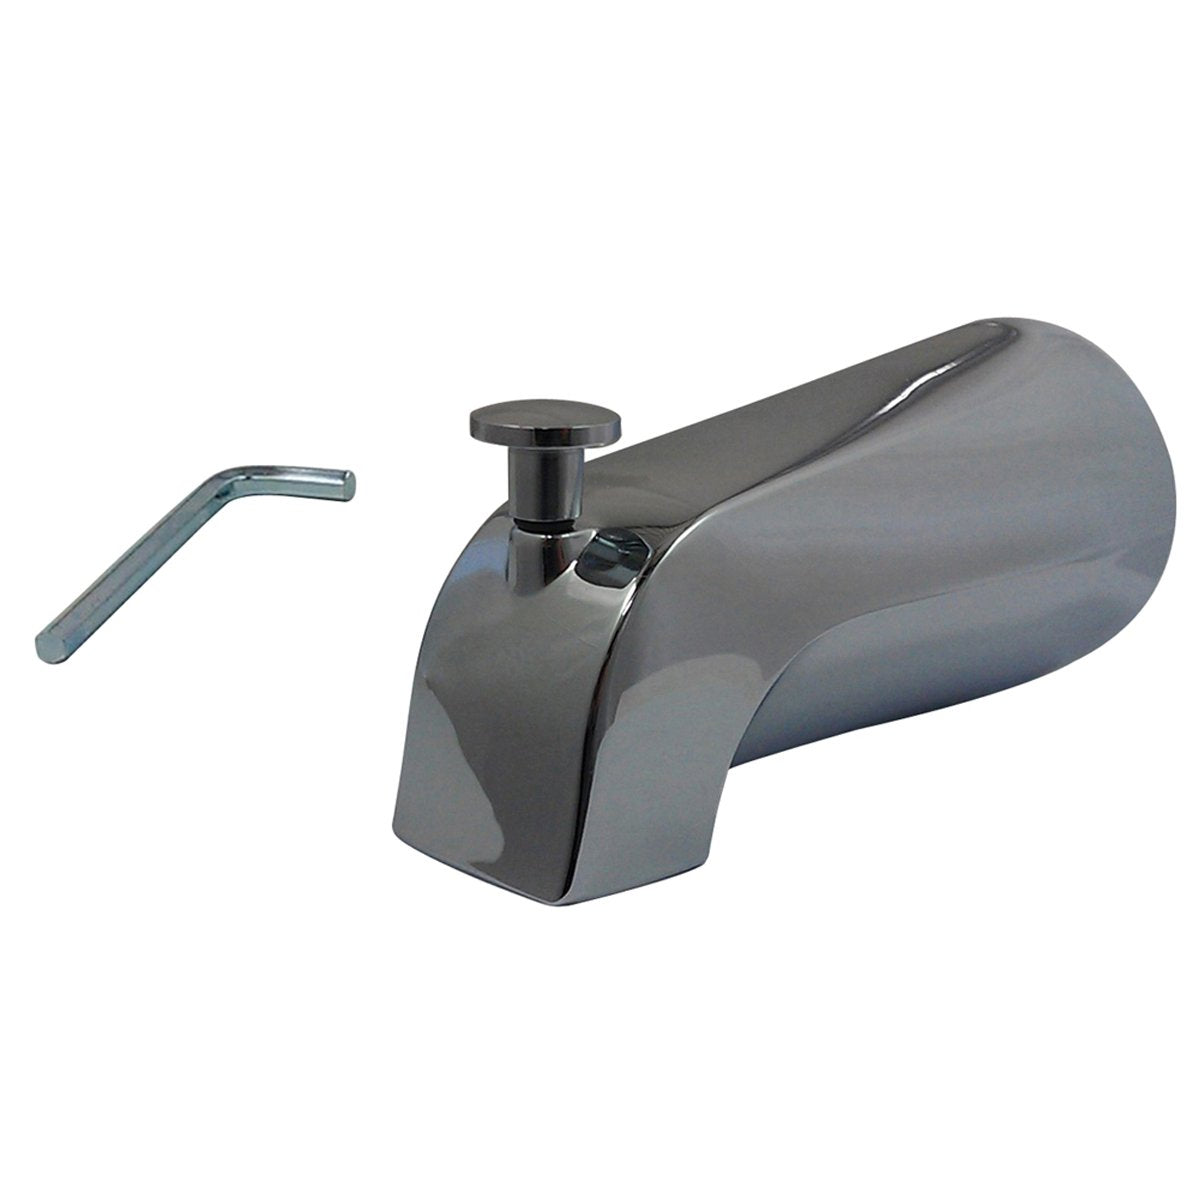 Kingston Brass Made to Match K1231A1 5-3/8" Diverter Tub Spout in Chrome-Bathroom Accessories-Free Shipping-Directsinks.